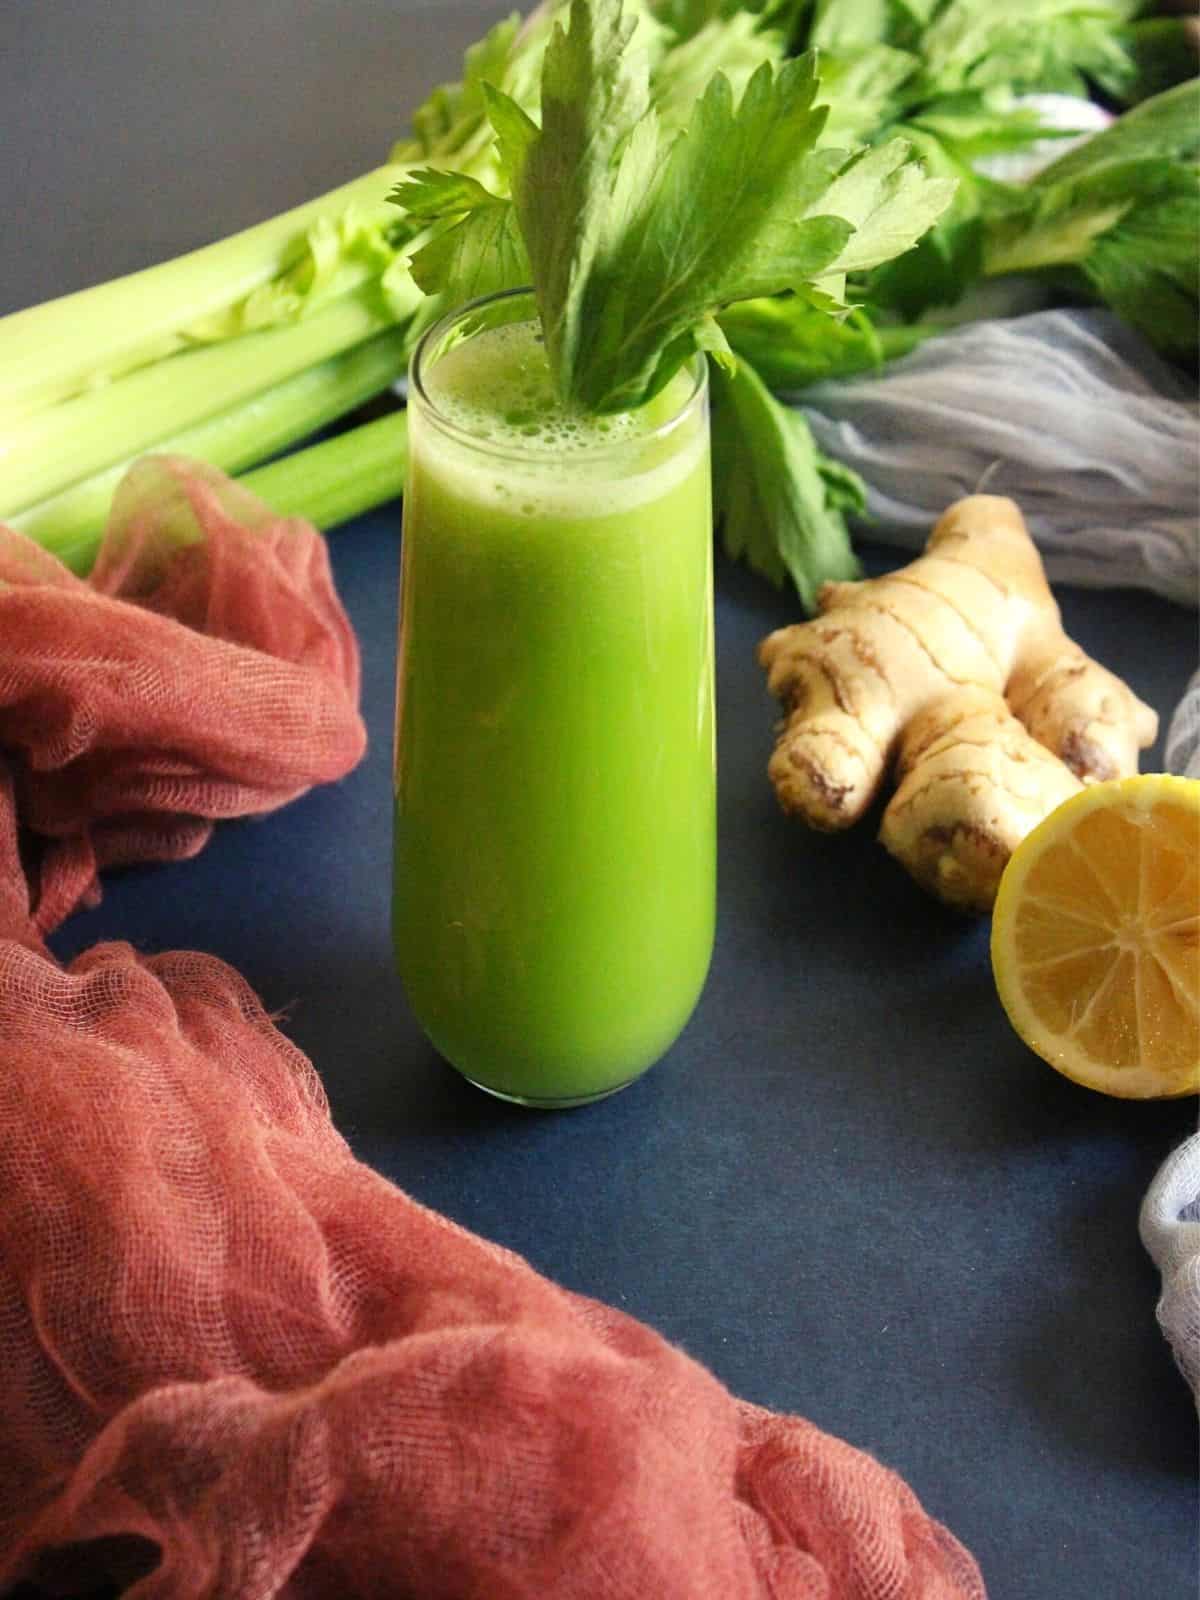 green juice recipe for weight loss and cleansing - Yummy Indian